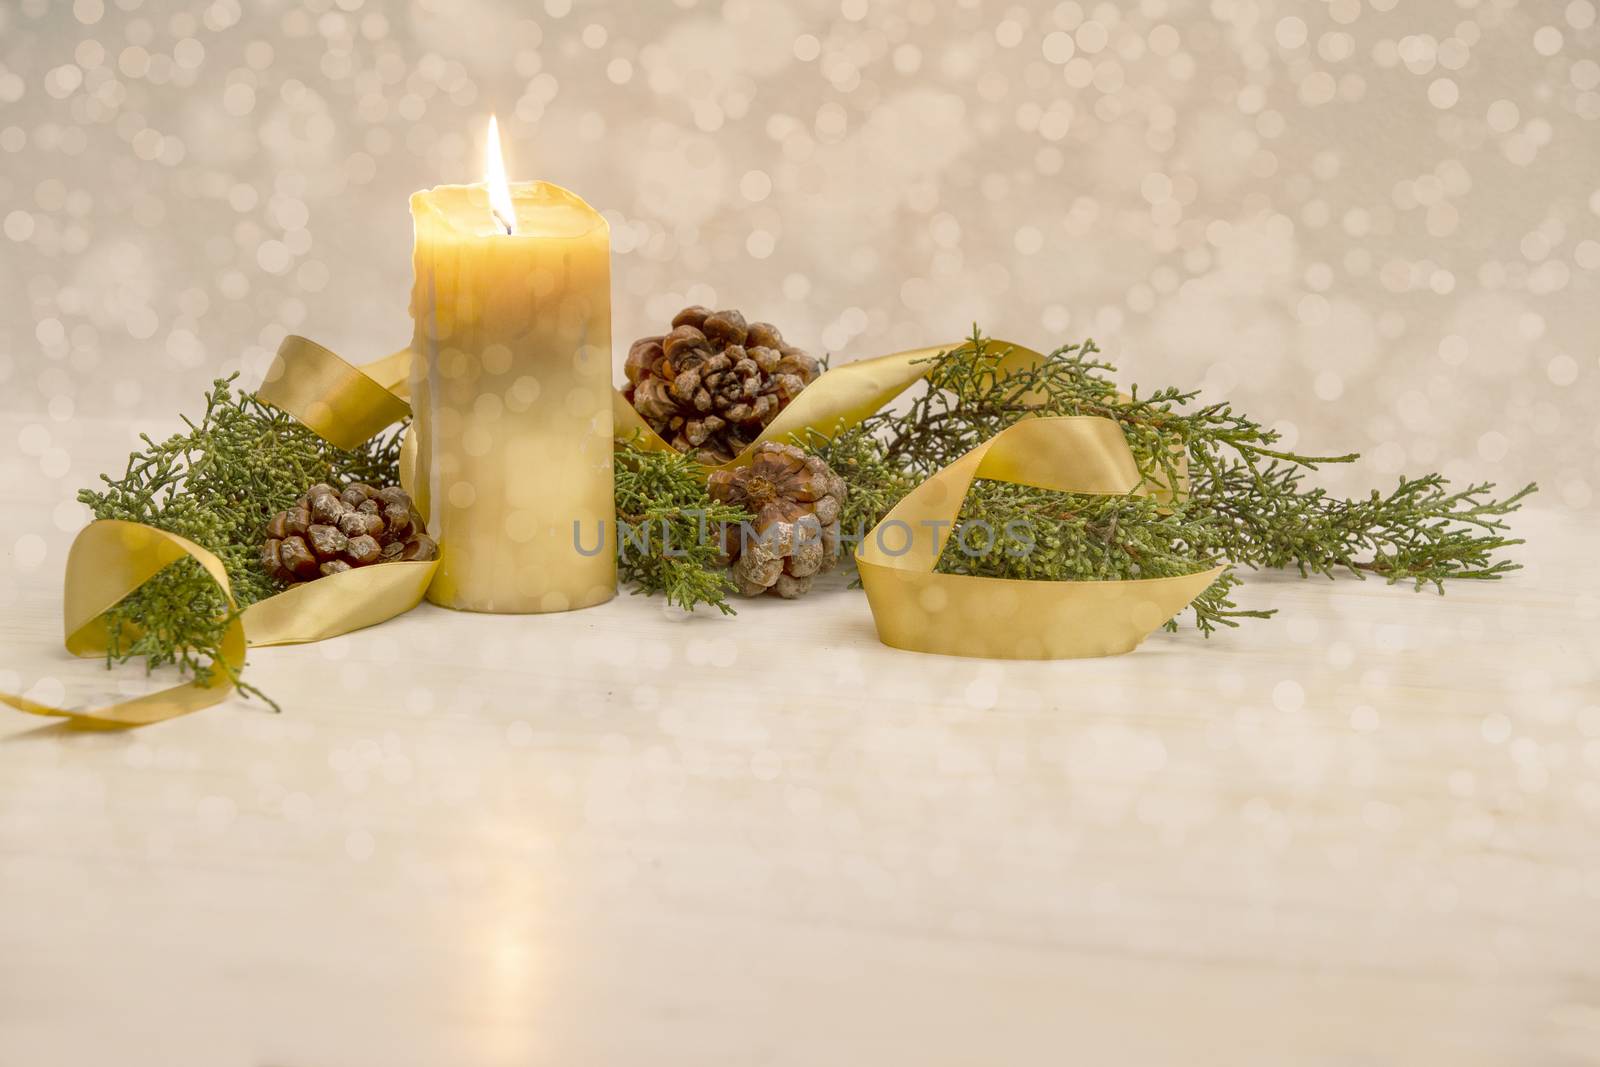 Christmas copy space with a lit yellow candle, pine branches, golden satin ribbon and natural pine cones on a light patterned background